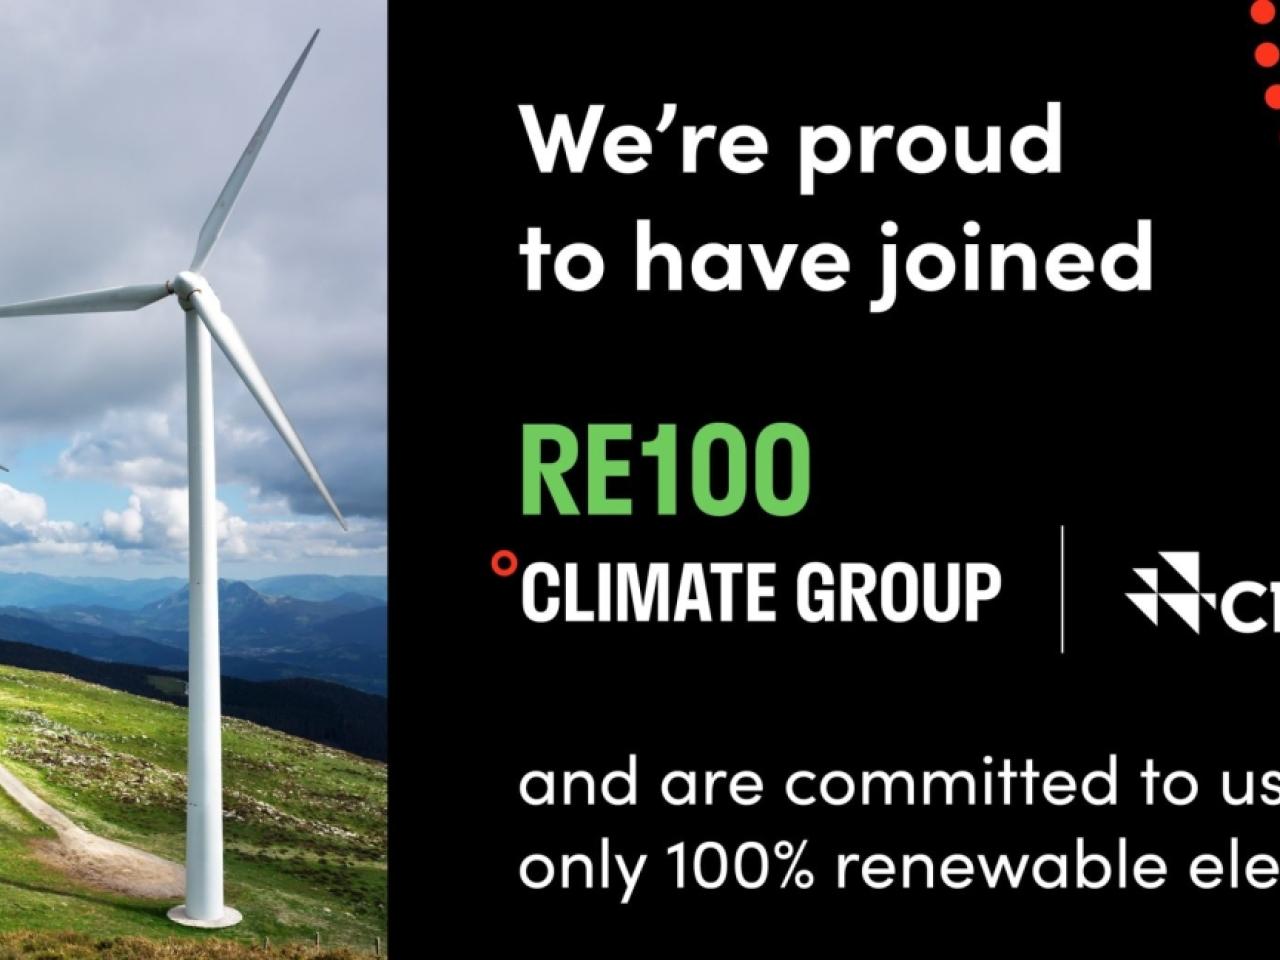 Wind turbines with text: We're proud to have joined RE100 Climate Group and are committed to using only 100% renewable electricity